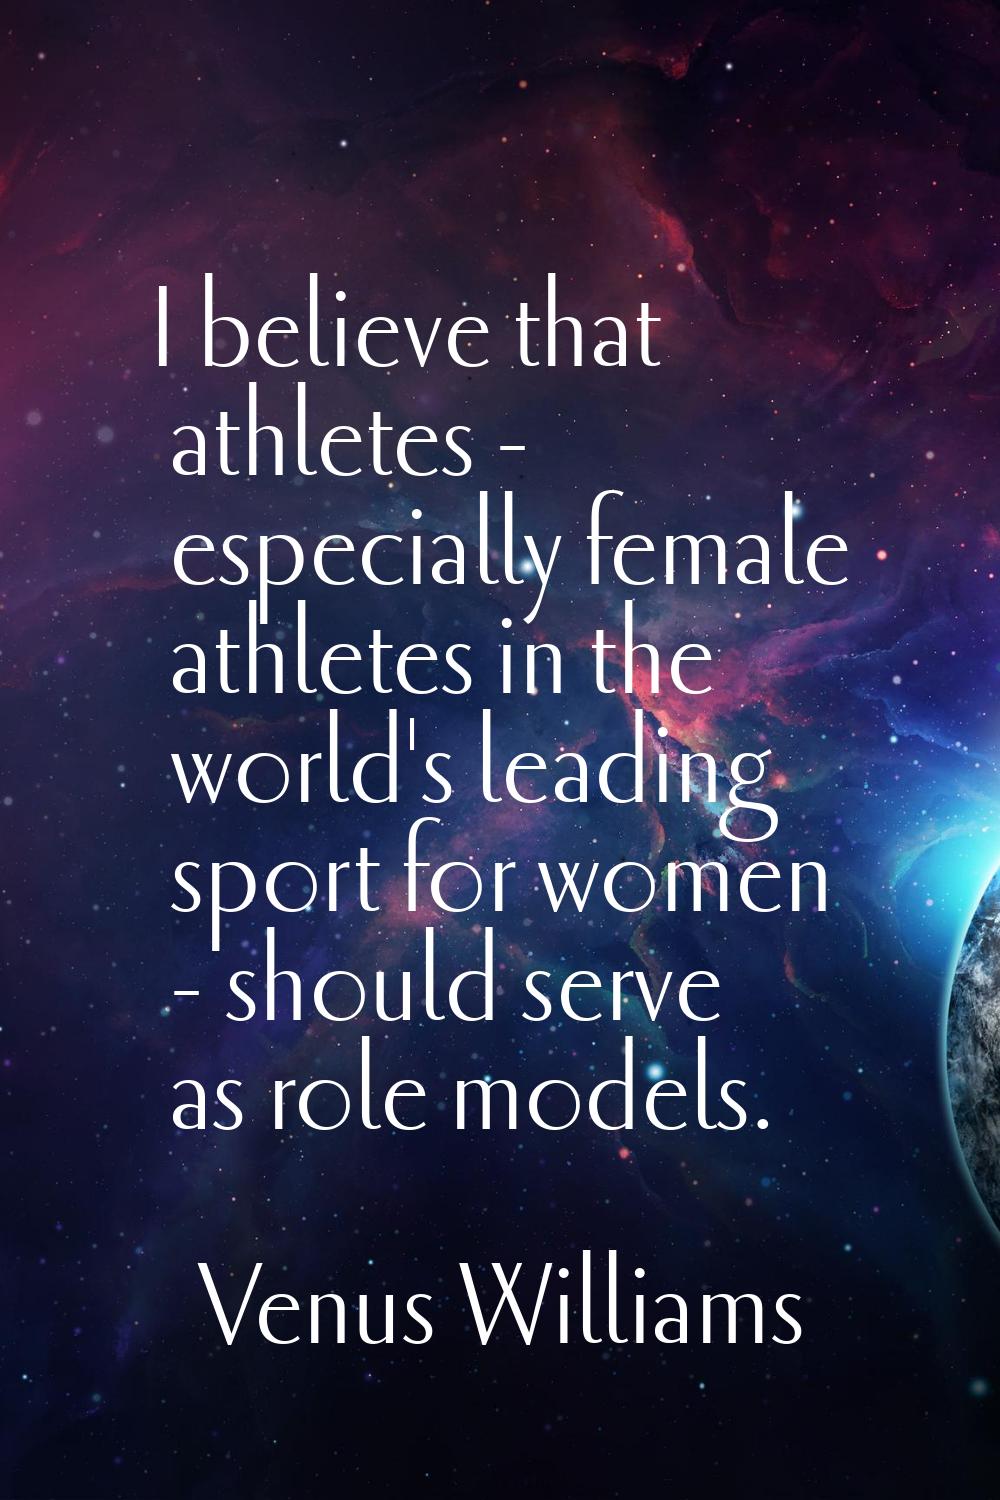 I believe that athletes - especially female athletes in the world's leading sport for women - shoul